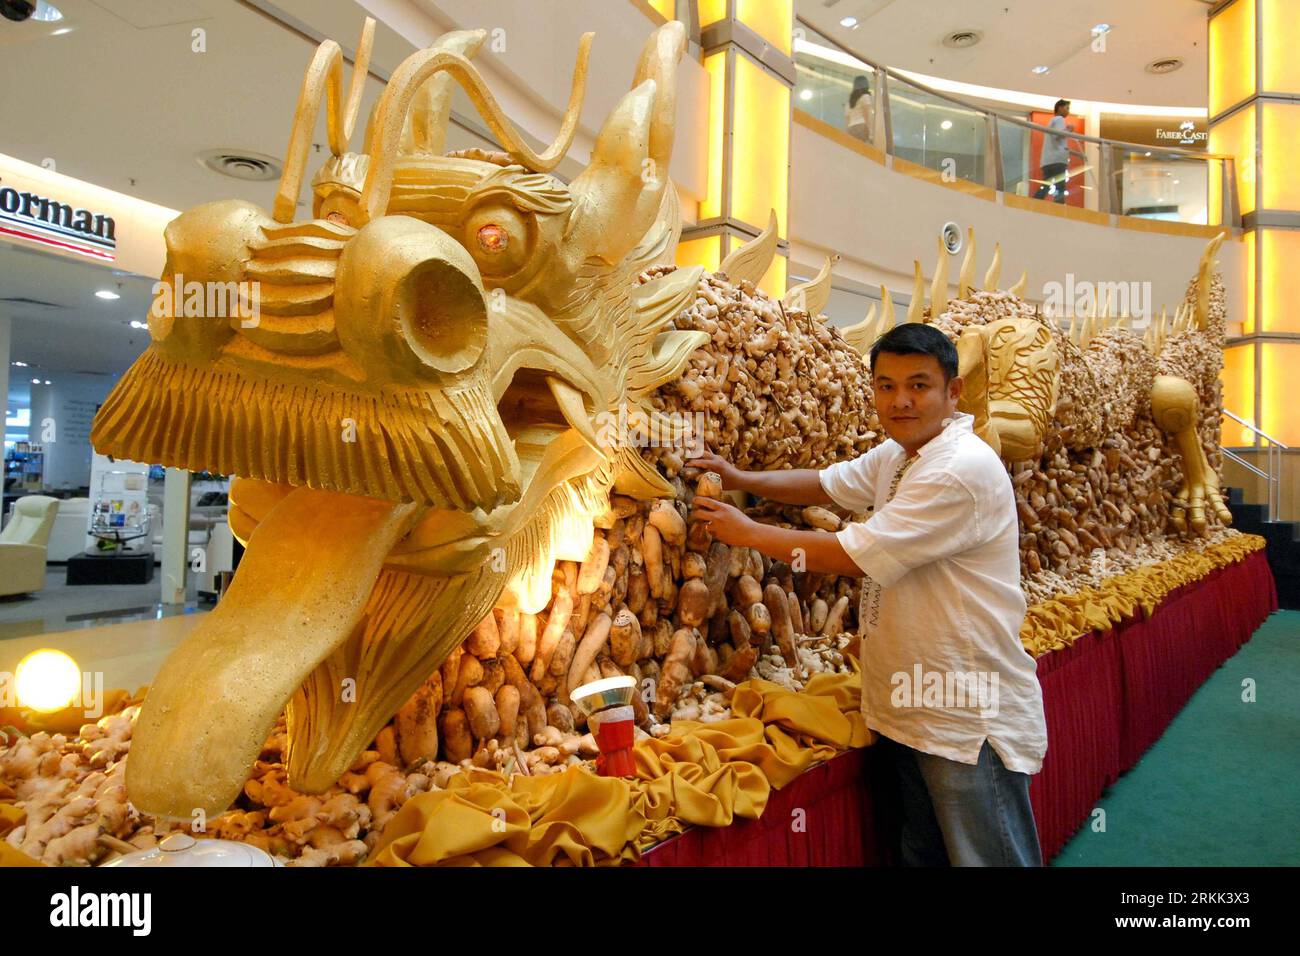 Bildnummer: 56195771  Datum: 19.10.2011  Copyright: imago/Xinhua (111019) -- KUALA LUMPUR, Oct. 19, 2011 (Xinhua) -- A staff member has a picture taken with a huge dragon sculpture which is made of ginger and lotus root in a shop in Kuala Lumpur, Malaysia, Oct. 19, 2011. The dragon sculpture measures 10.688 meters long and it took 20 workers in 2 months time in making. (Xinhua/Chong Voon Chung) MALAYSIA-KUALA LUMPUR-DRAGON MADE OF GINGER PUBLICATIONxNOTxINxCHN Gesellschaft Skulptur Figur Drachen Ingwer Lotoswurzel Kurios xbs x0x 2011 quer      56195771 Date 19 10 2011 Copyright Imago XINHUA  K Stock Photo